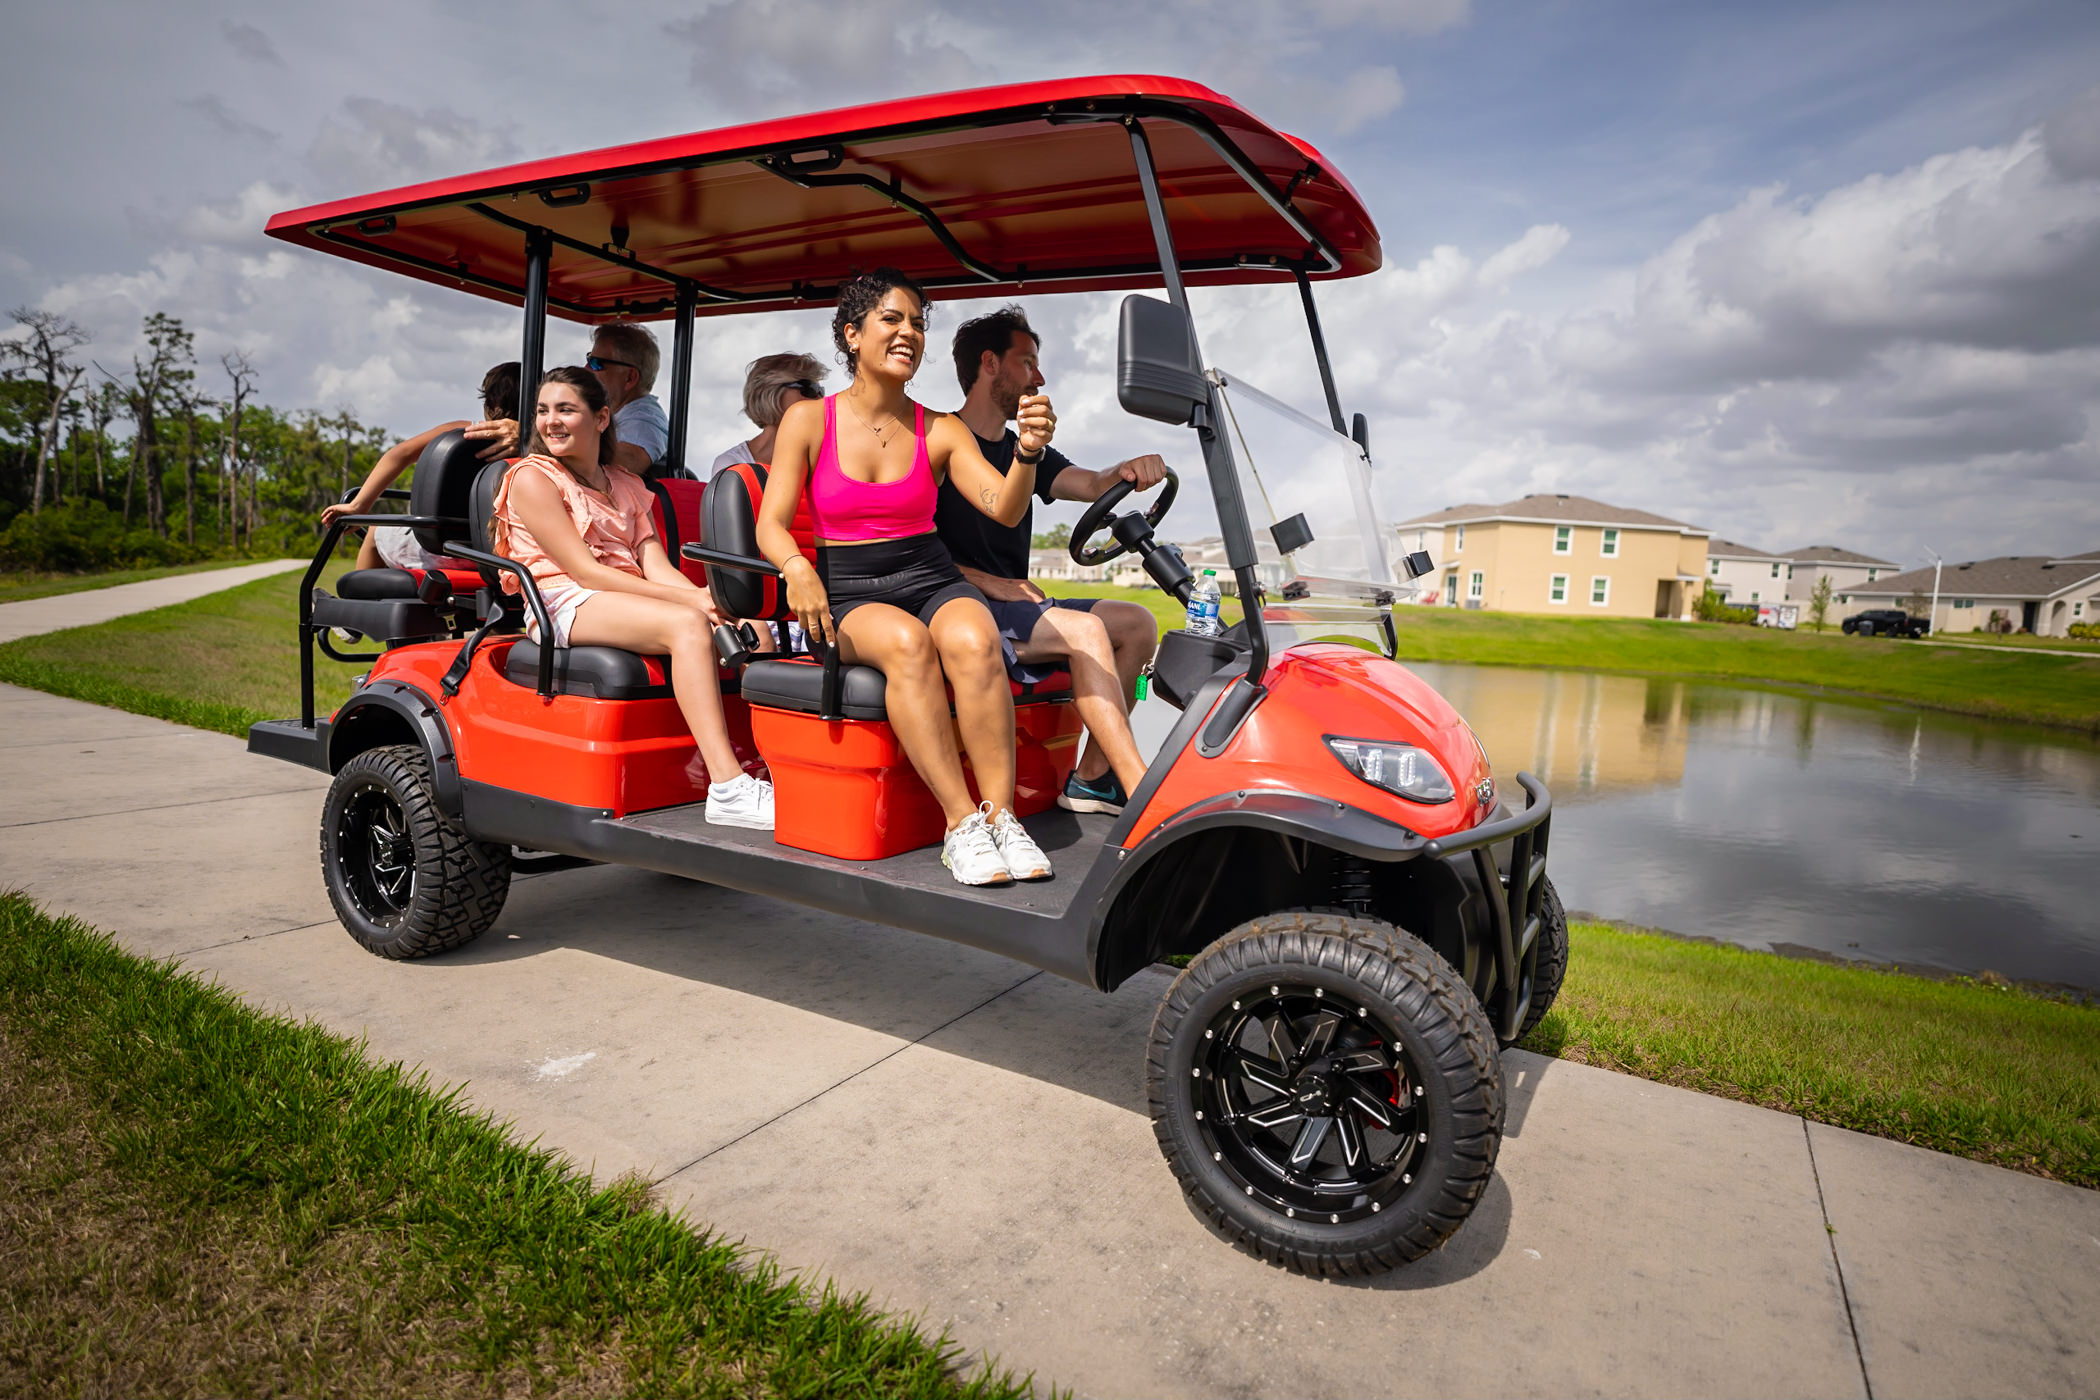 Family riding on a red golf cart